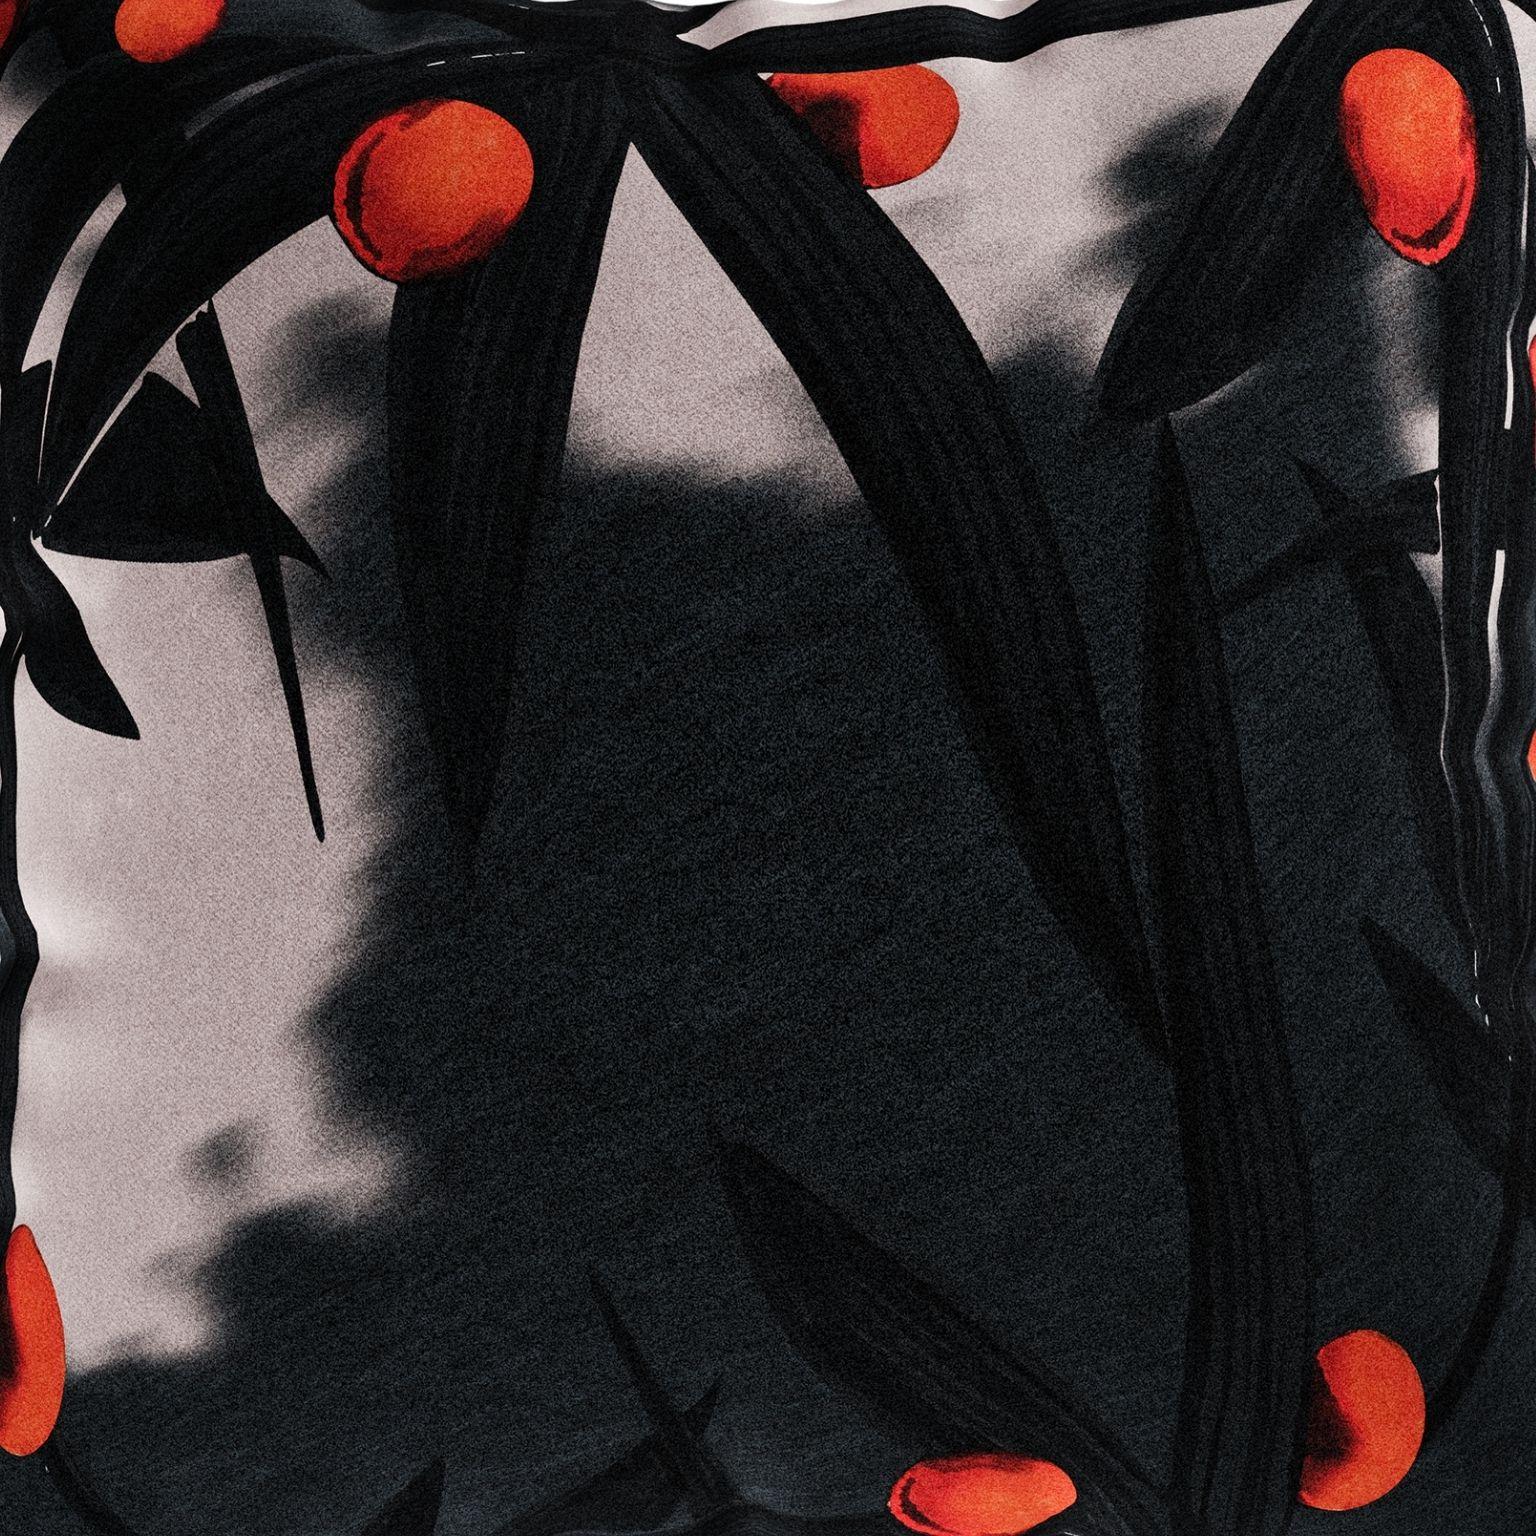 Modern Black Oranges Cushion, Luxury Dark Pattern Velvet Pillow Fringes Tassels
Naranja Ach cushion combines beautiful graphic motifs with black and orange shades. Discover also the luxury collection of printed cushions. Refined and attractive